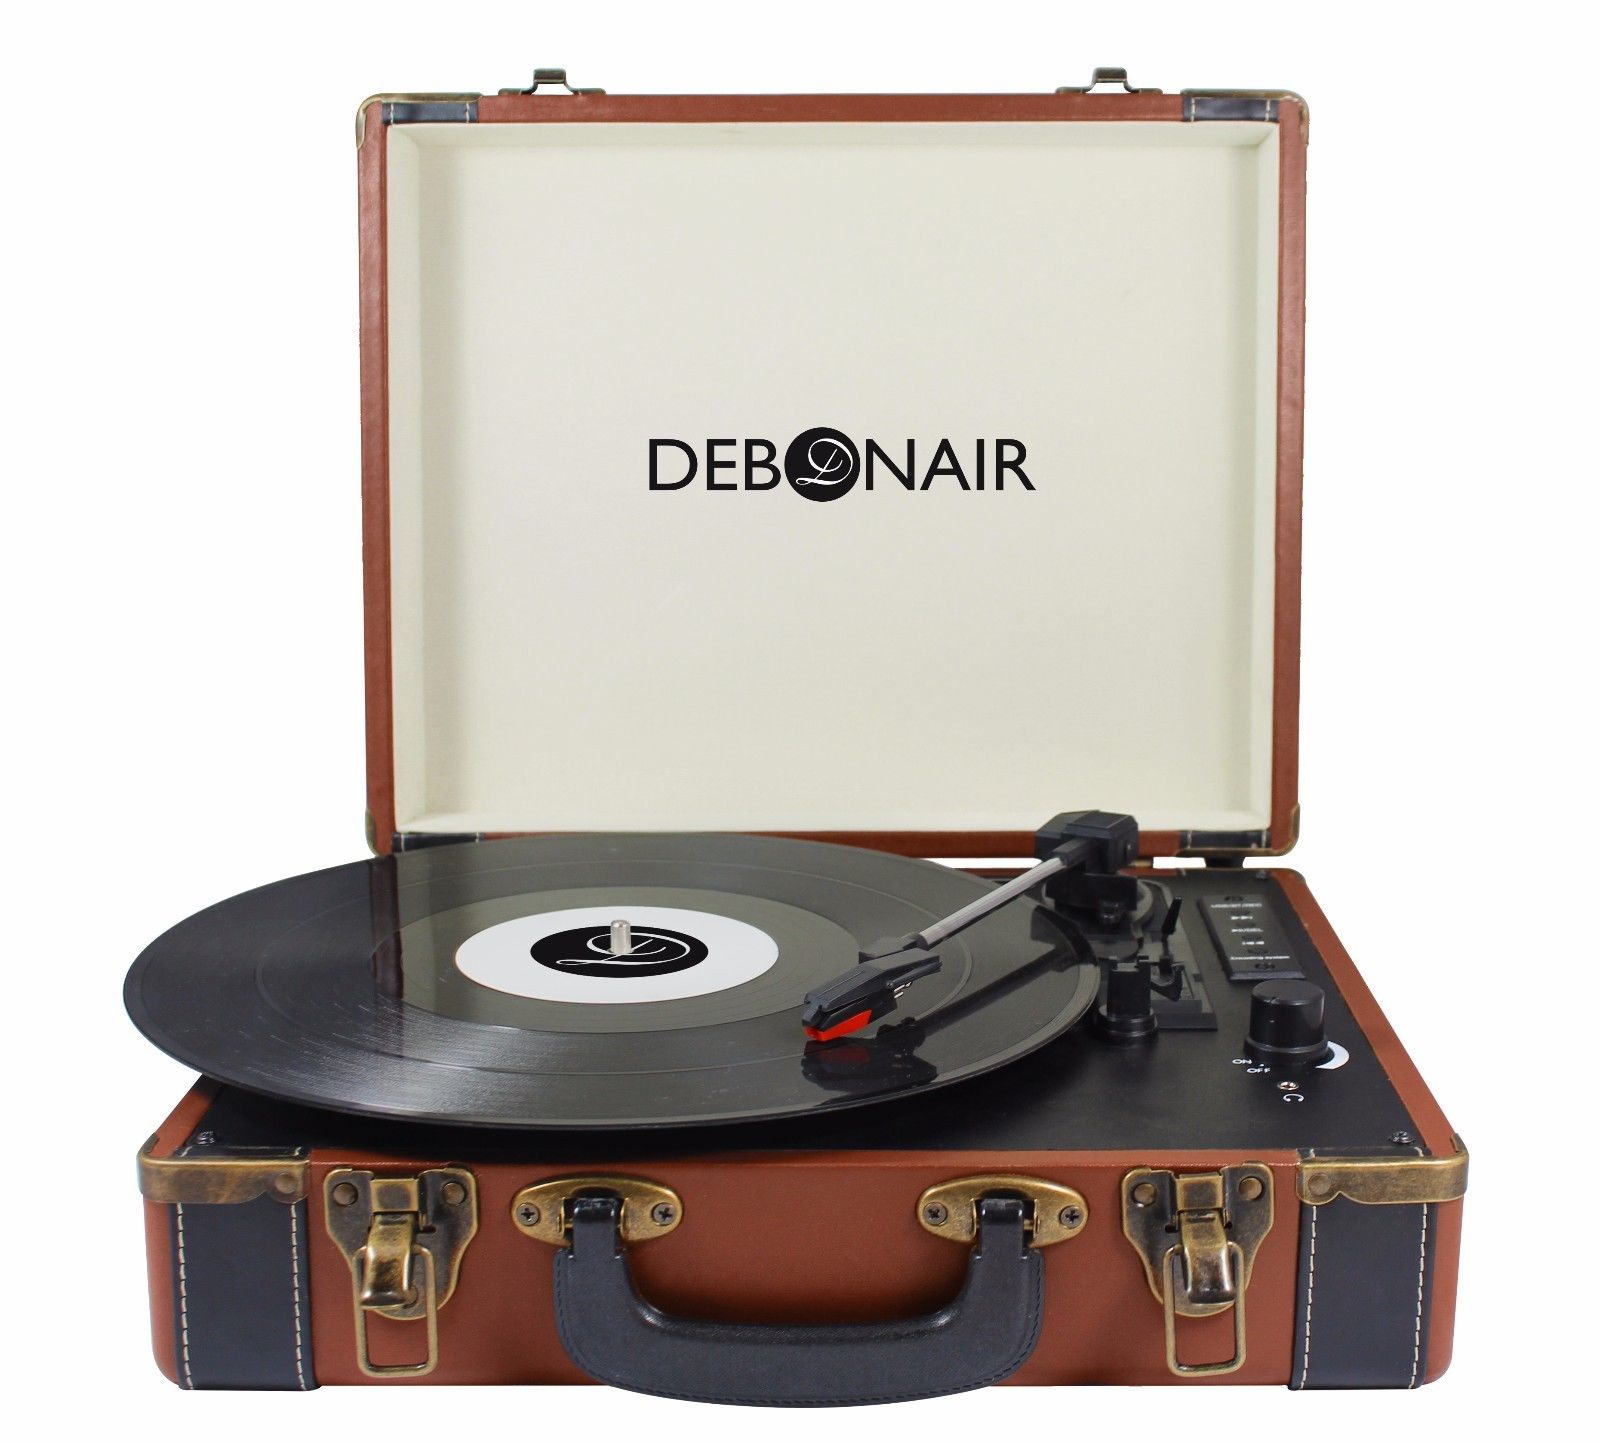 Brown/Black Retro Turntable Briefcase Style Vinyl Record Player with Bluetooth 